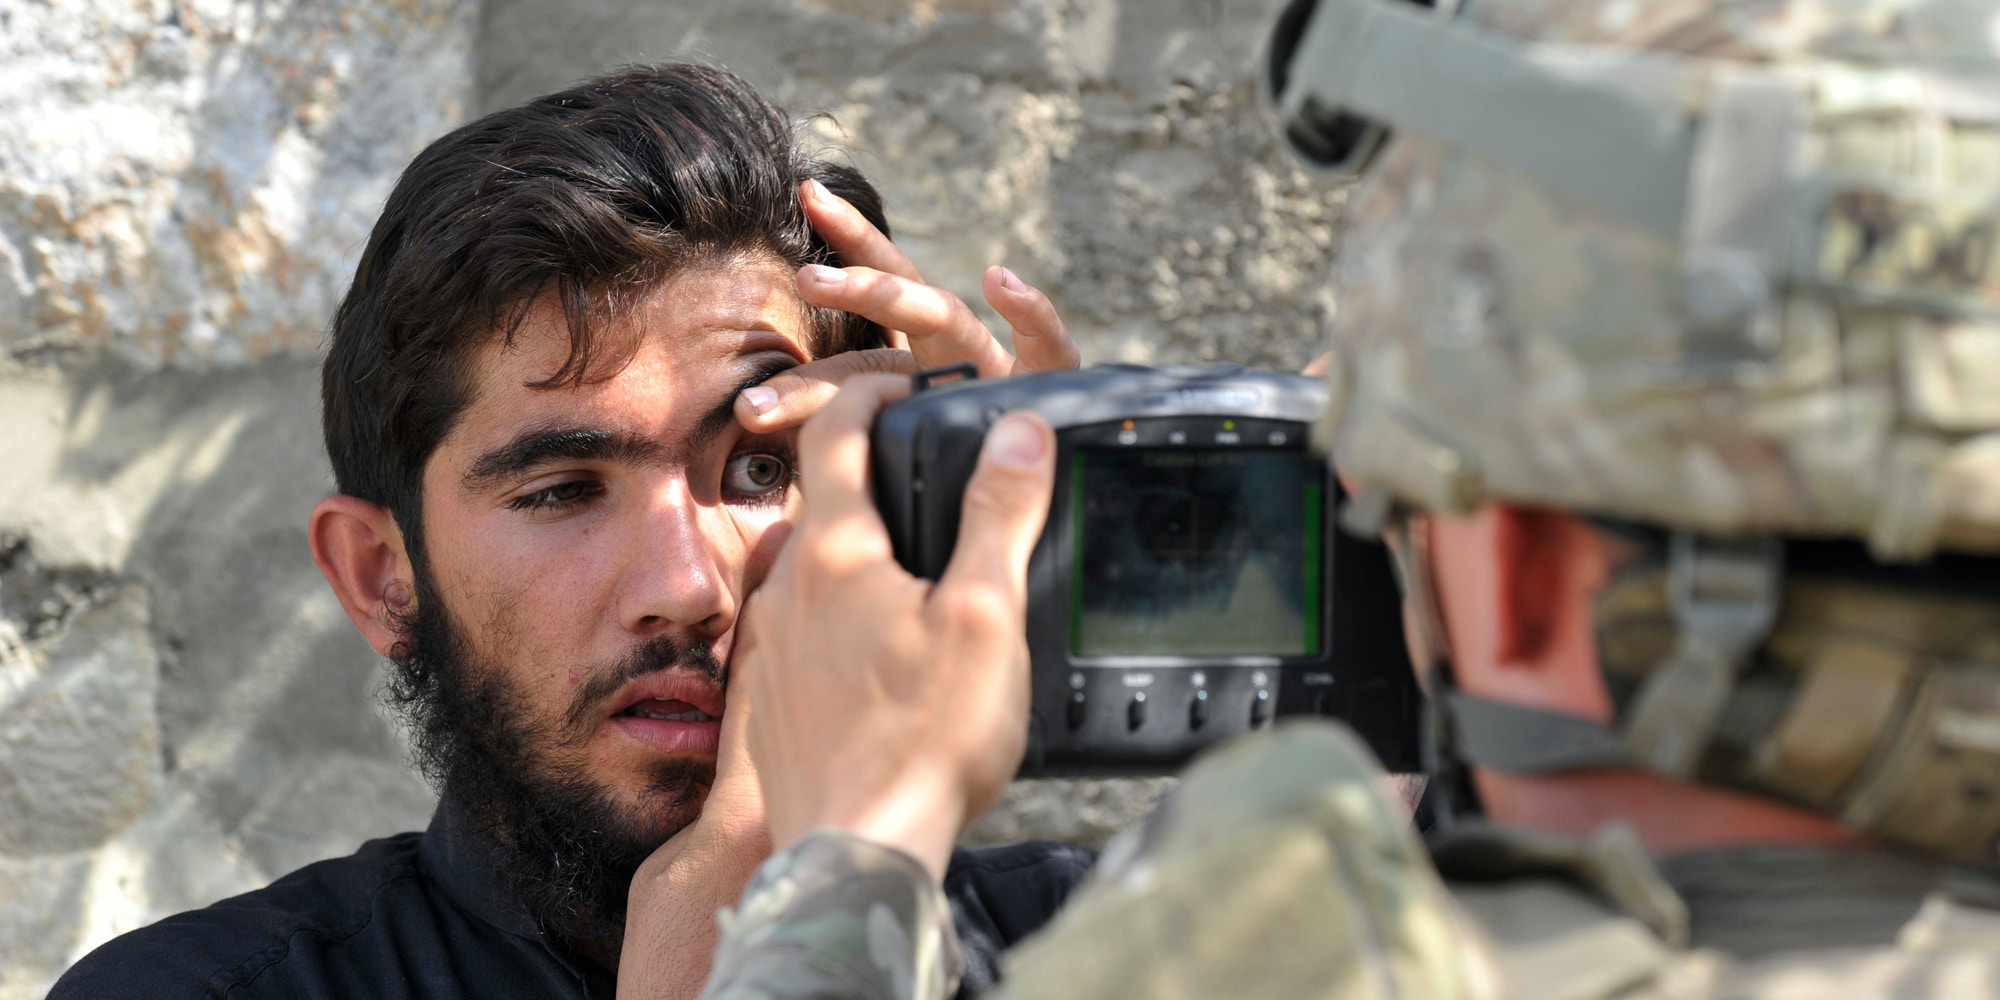 us Biometric equipment in the hands of the Taliban